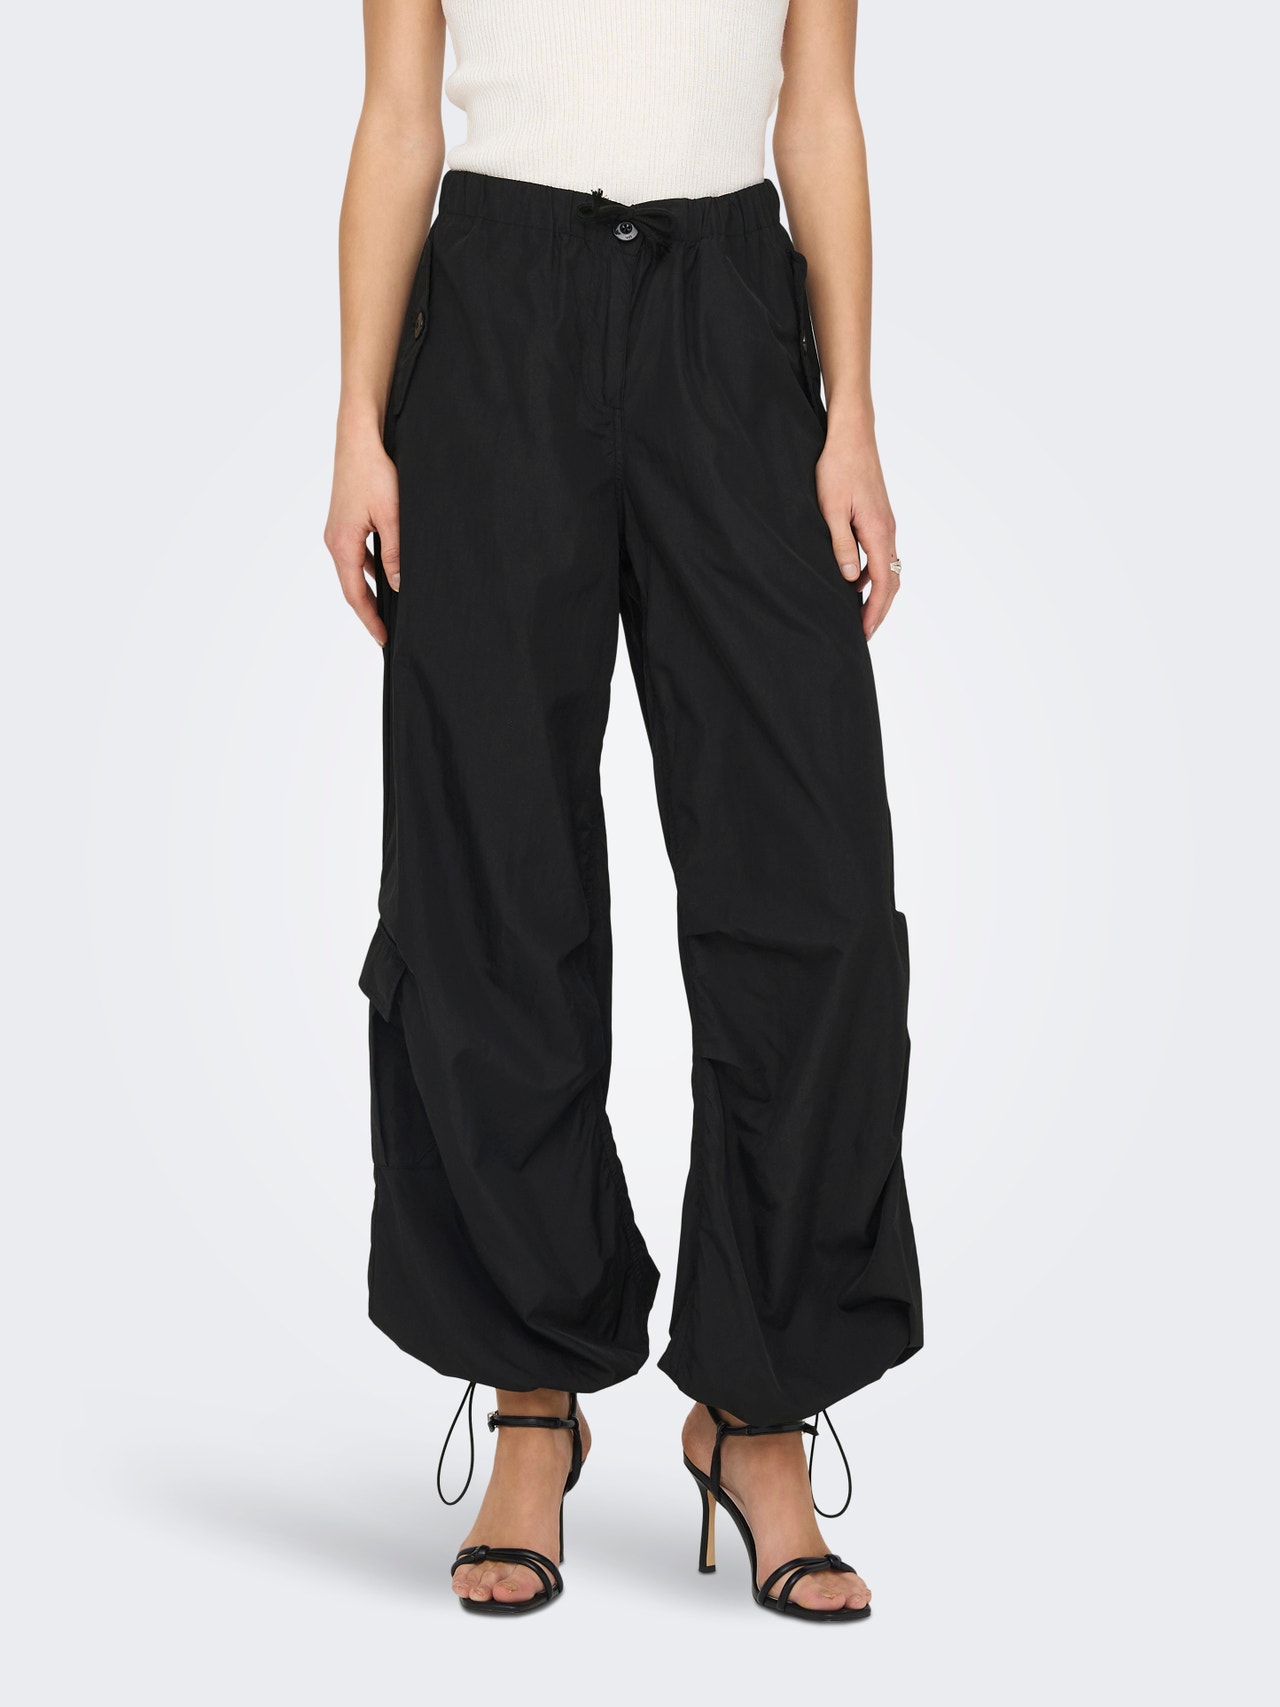 https://images.only.com/15303592/4312943/003/only-parachutepants-black.jpg?v=2e255f4fe0232f18e08e120f74e91739&format=webp&width=1280&quality=90&key=25-0-3